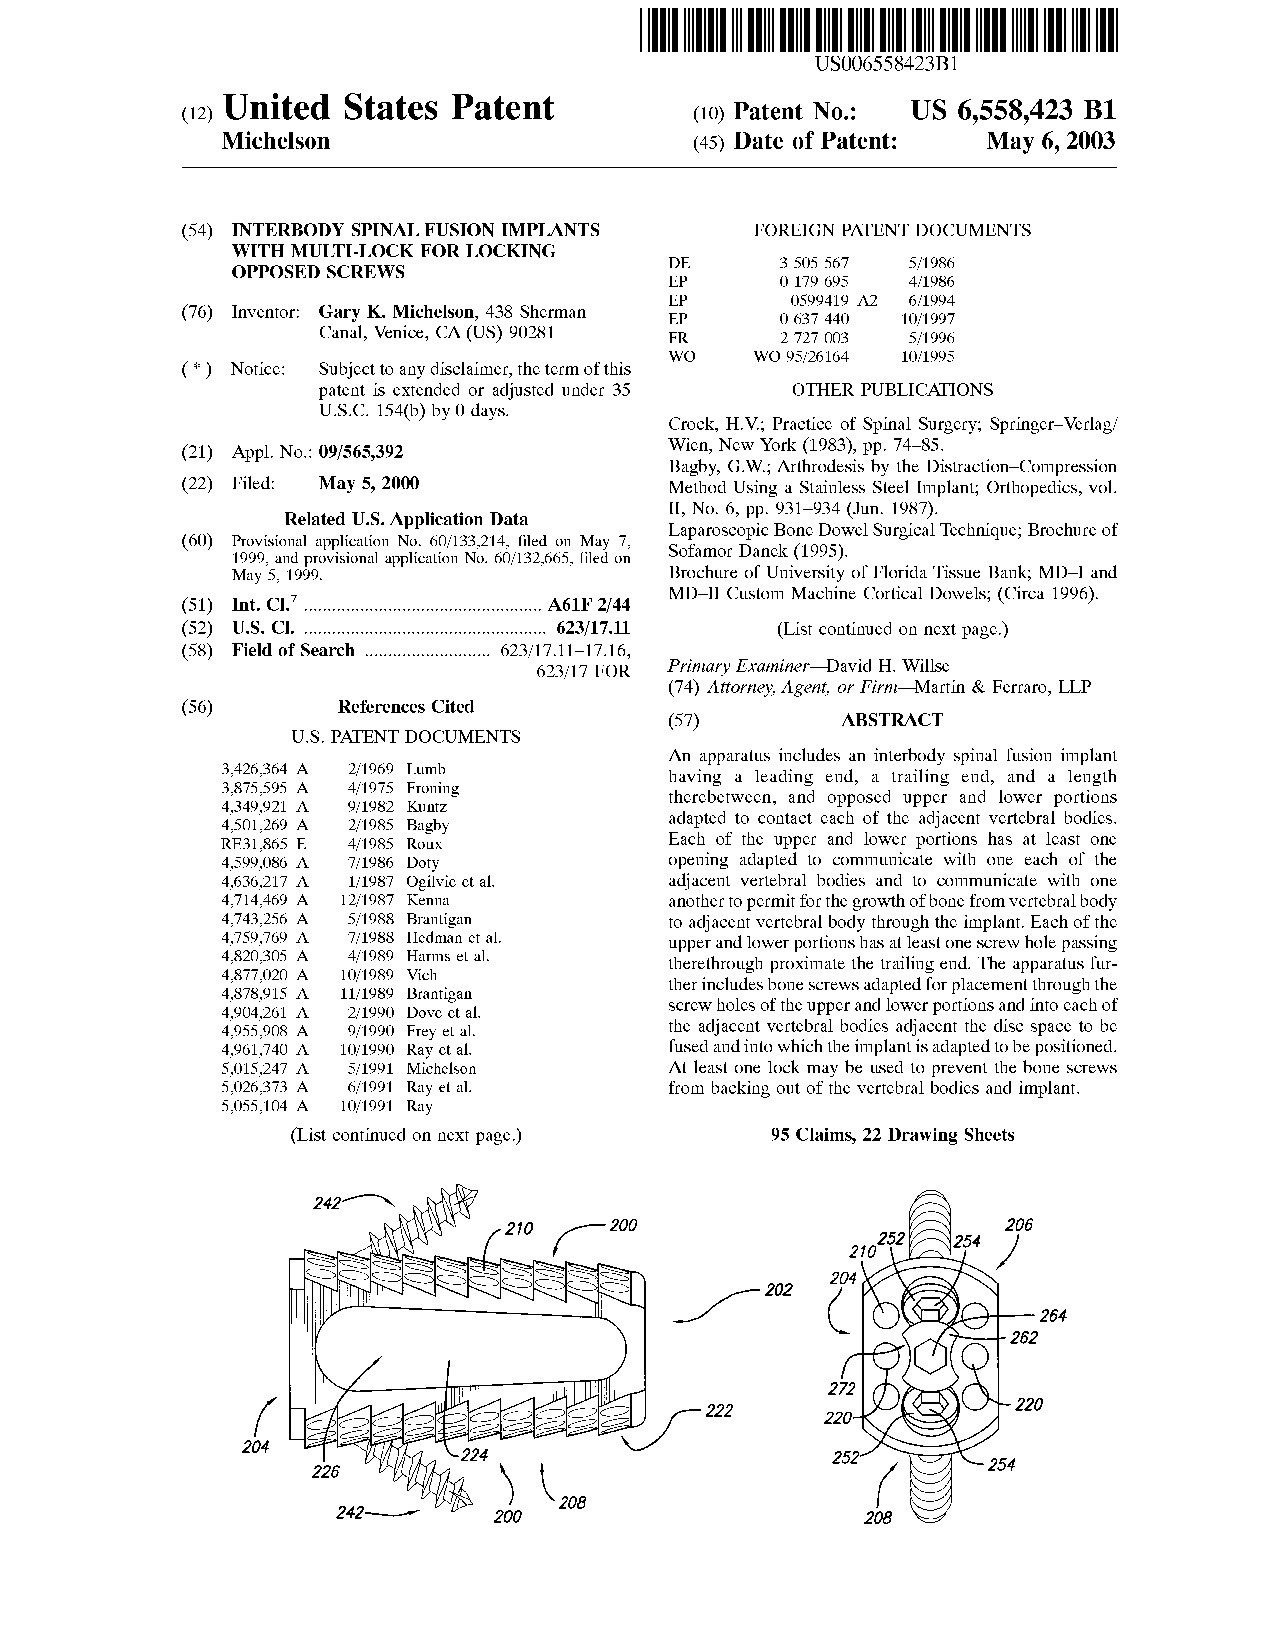 Interbody spinal fusion implants with multi-lock for locking opposed screws - Patent 6,558,423